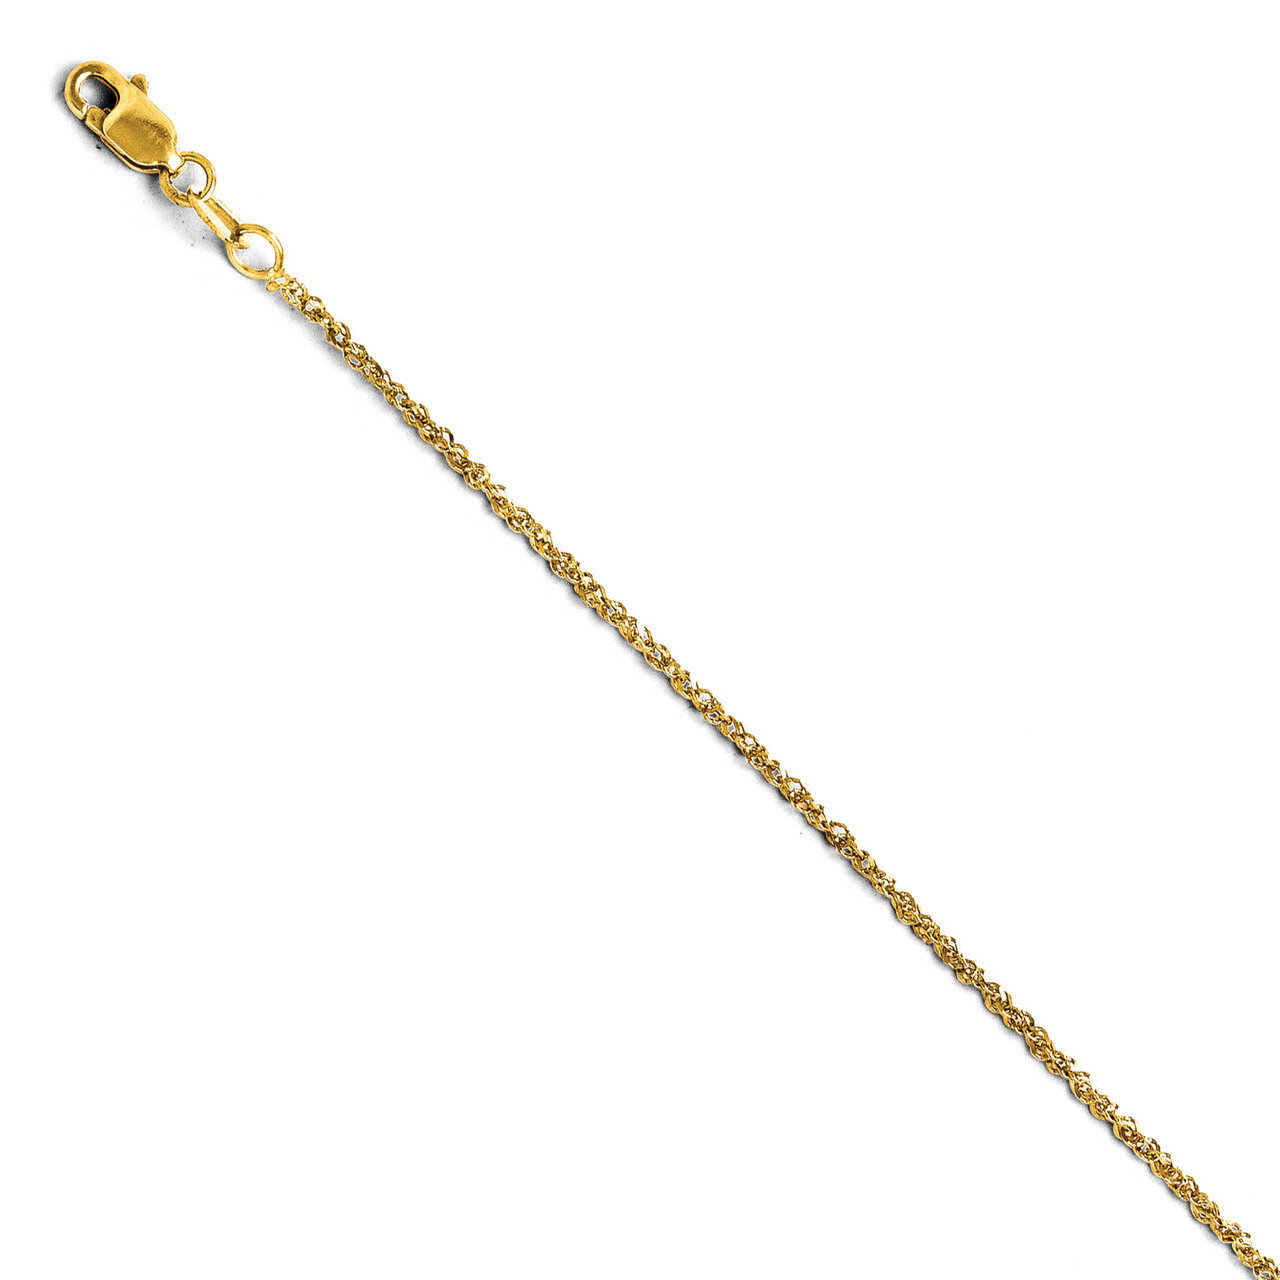 Sparkle Singapore Chain 18 Inch - 14k Gold HB-1830-18